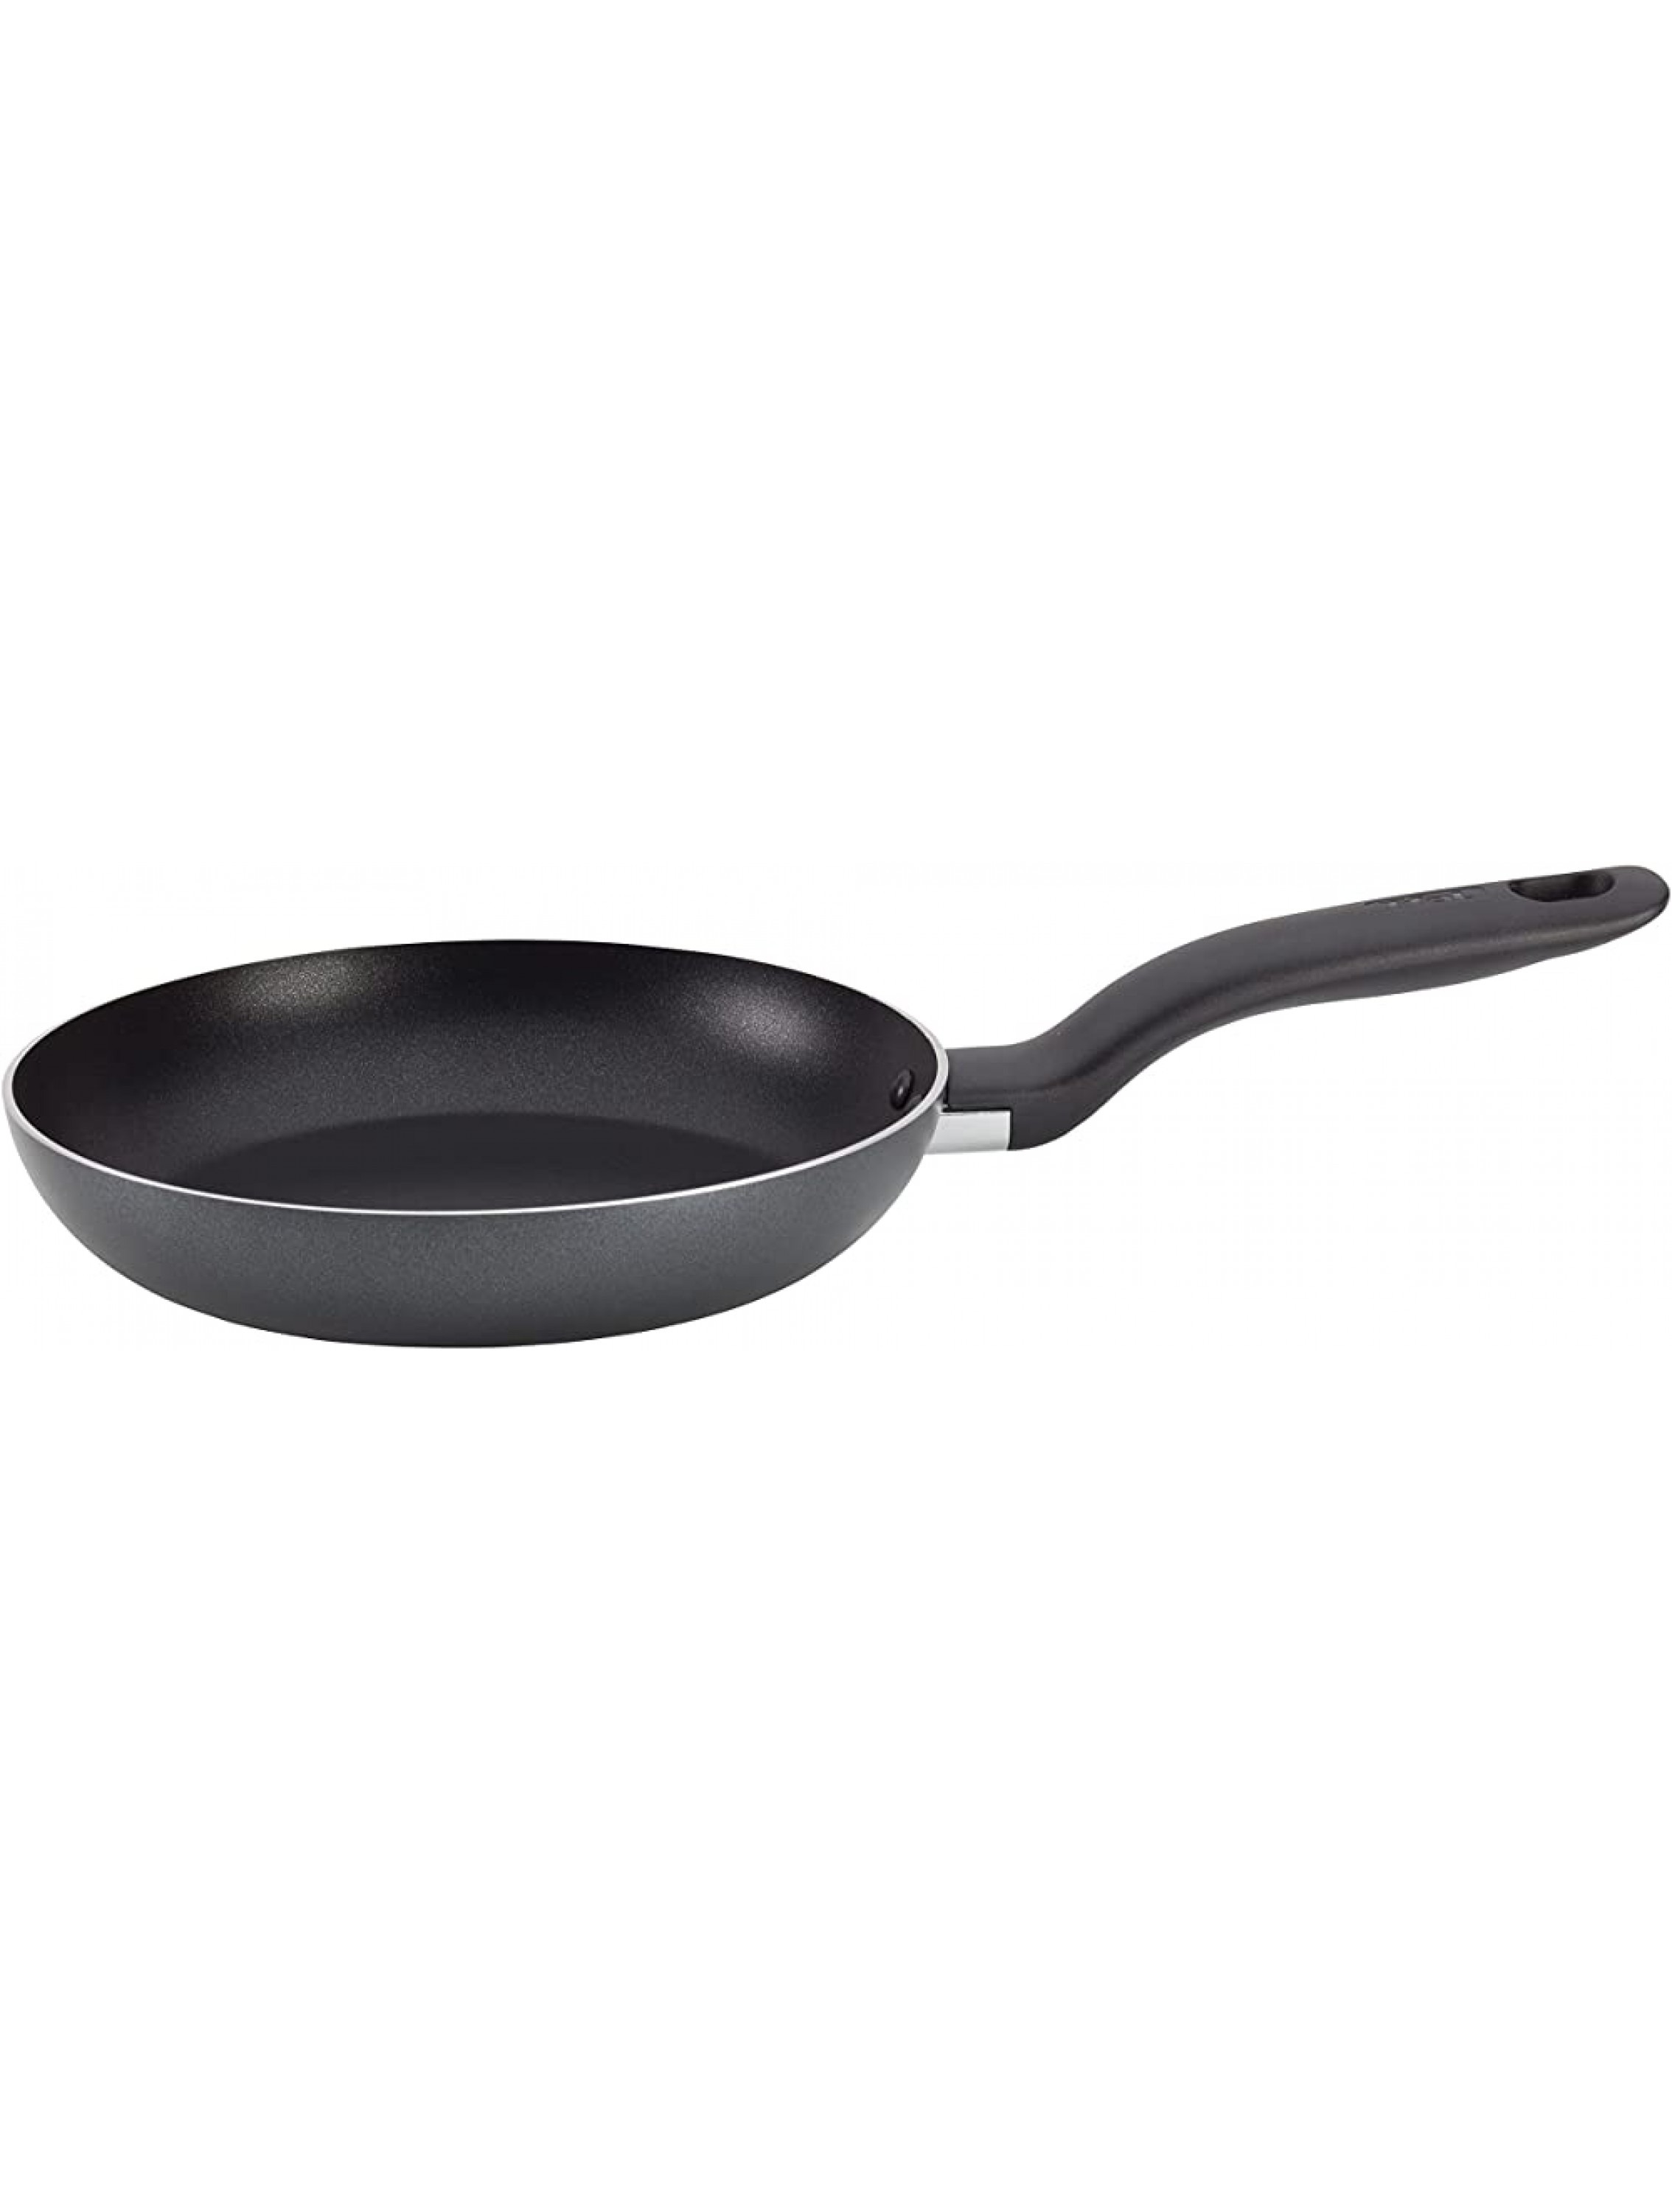 T-fal A8210594 Initiatives Nonstick Inside and Out Oven Safe Dishwasher Safe 10.25-Inch Fry Pan Saute Pan Cookware Grey - B822MQ2I7